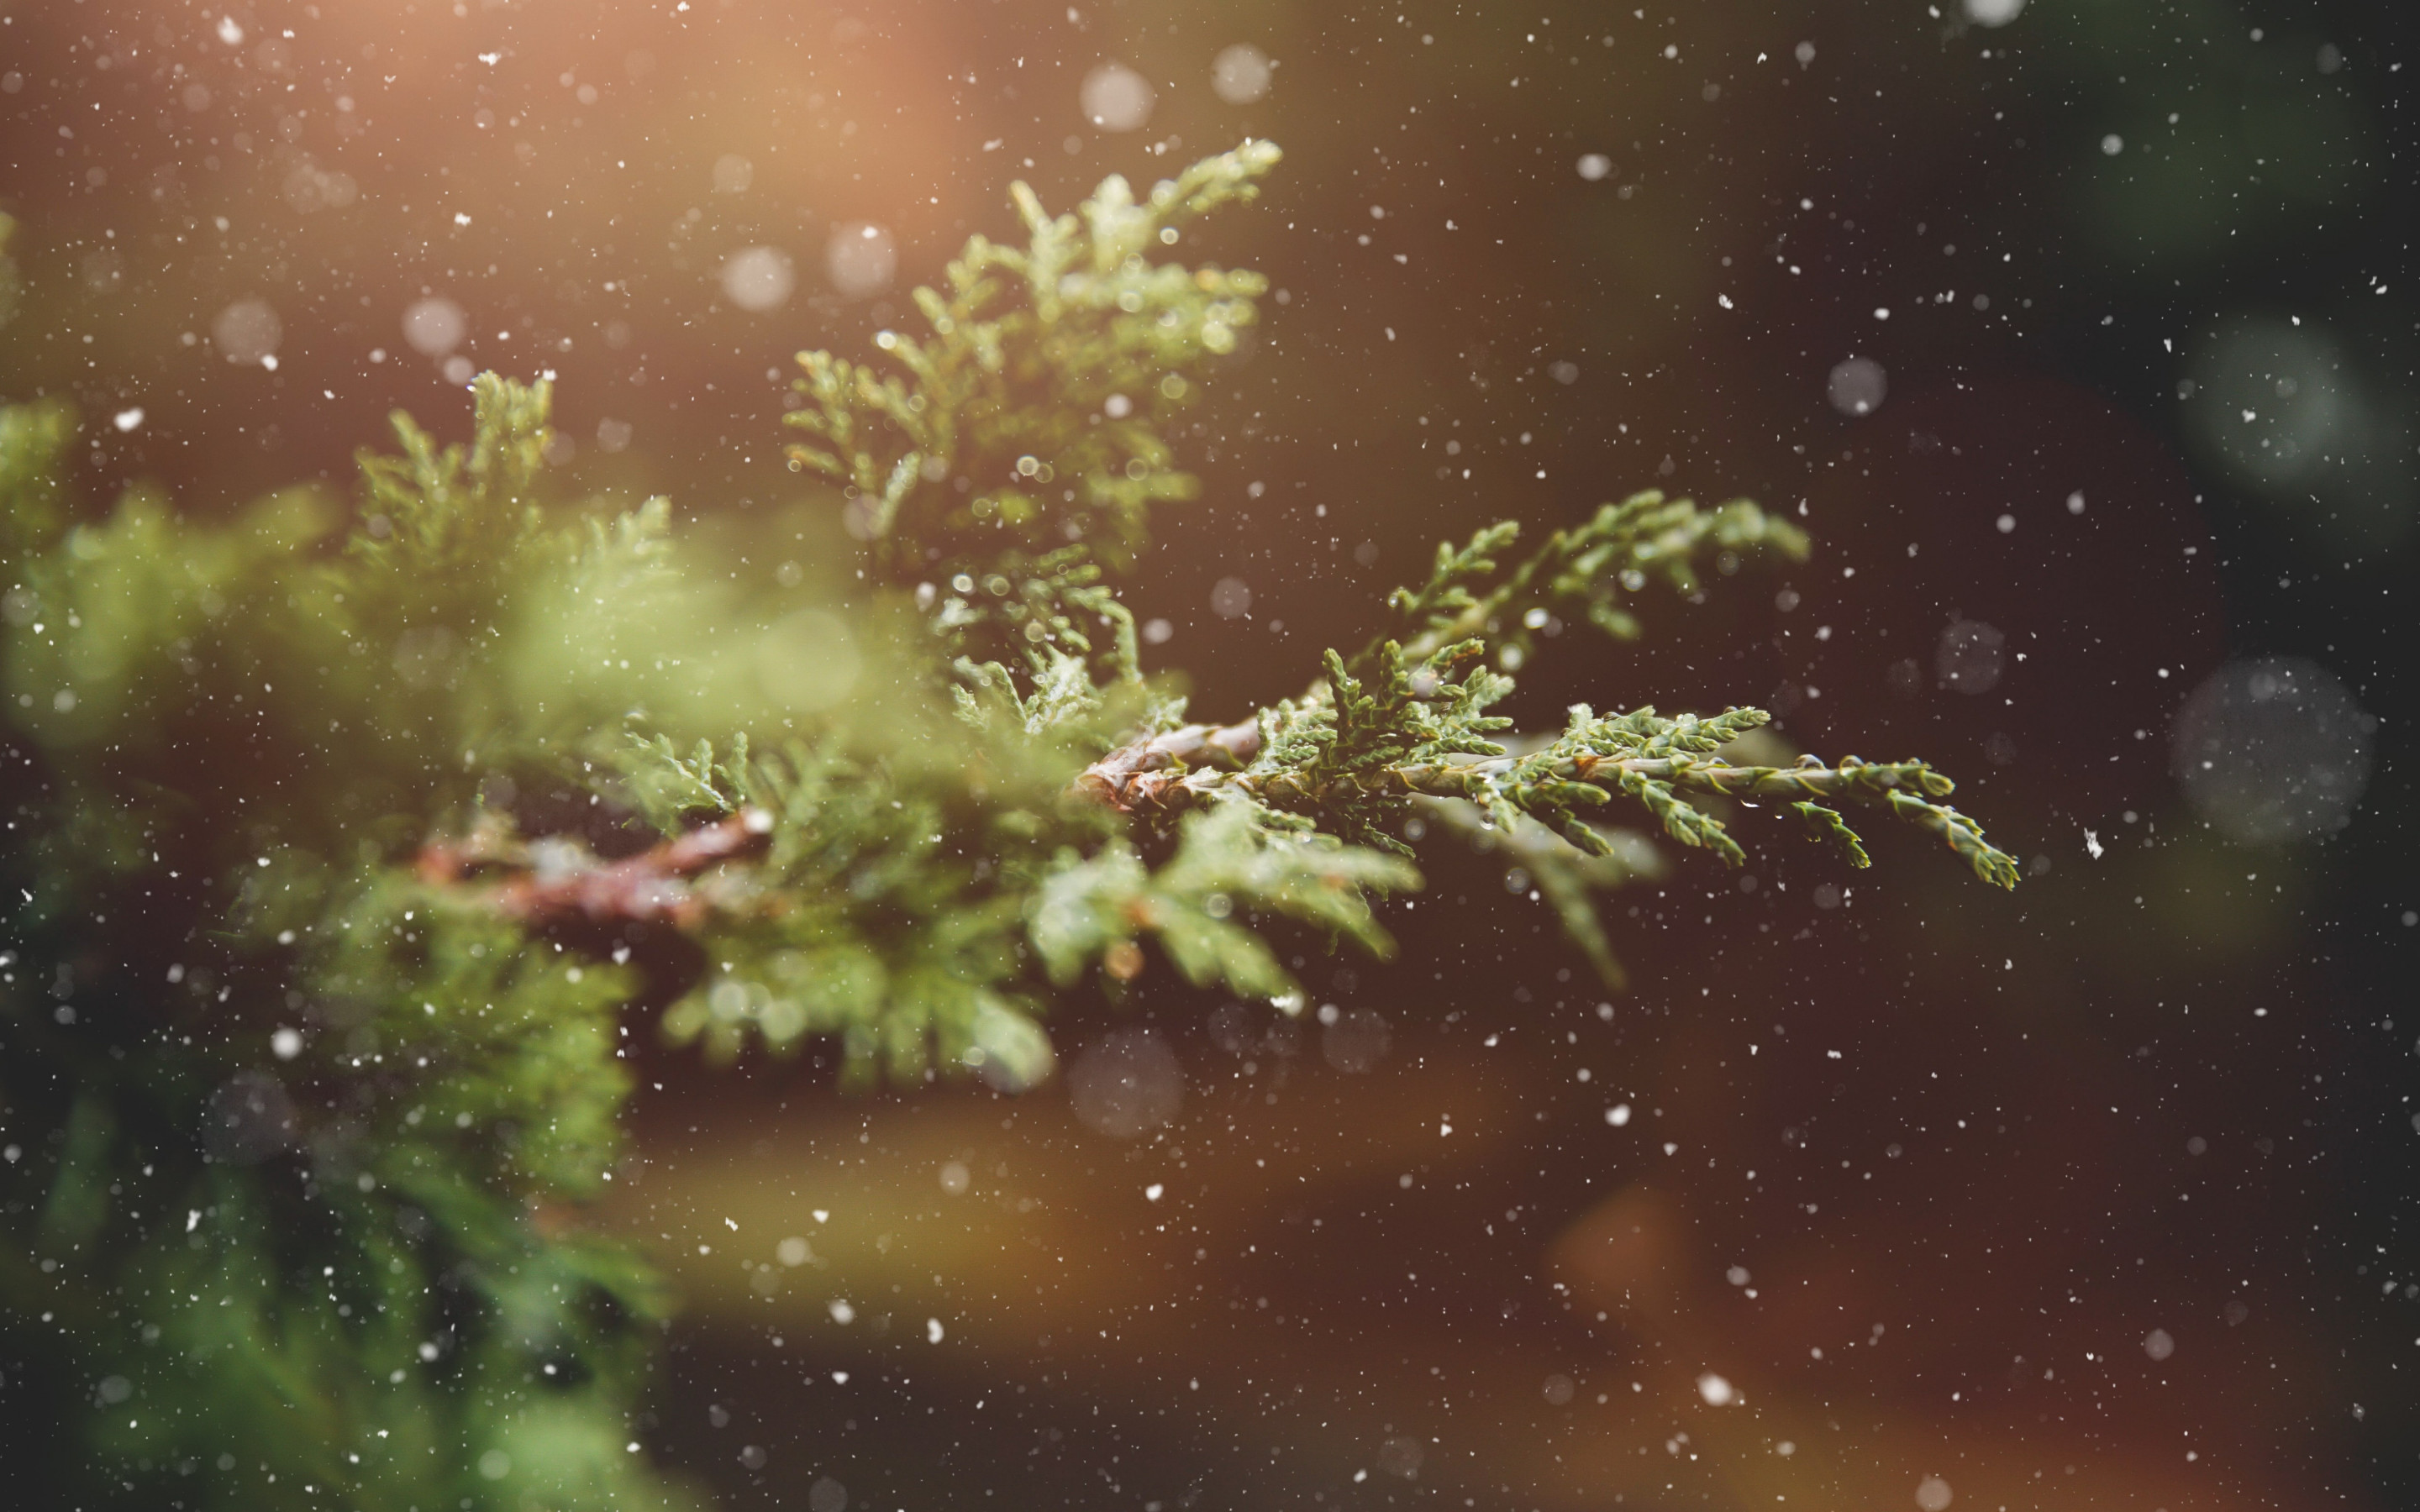 Snowflakes over the pine branch wallpaper 2880x1800